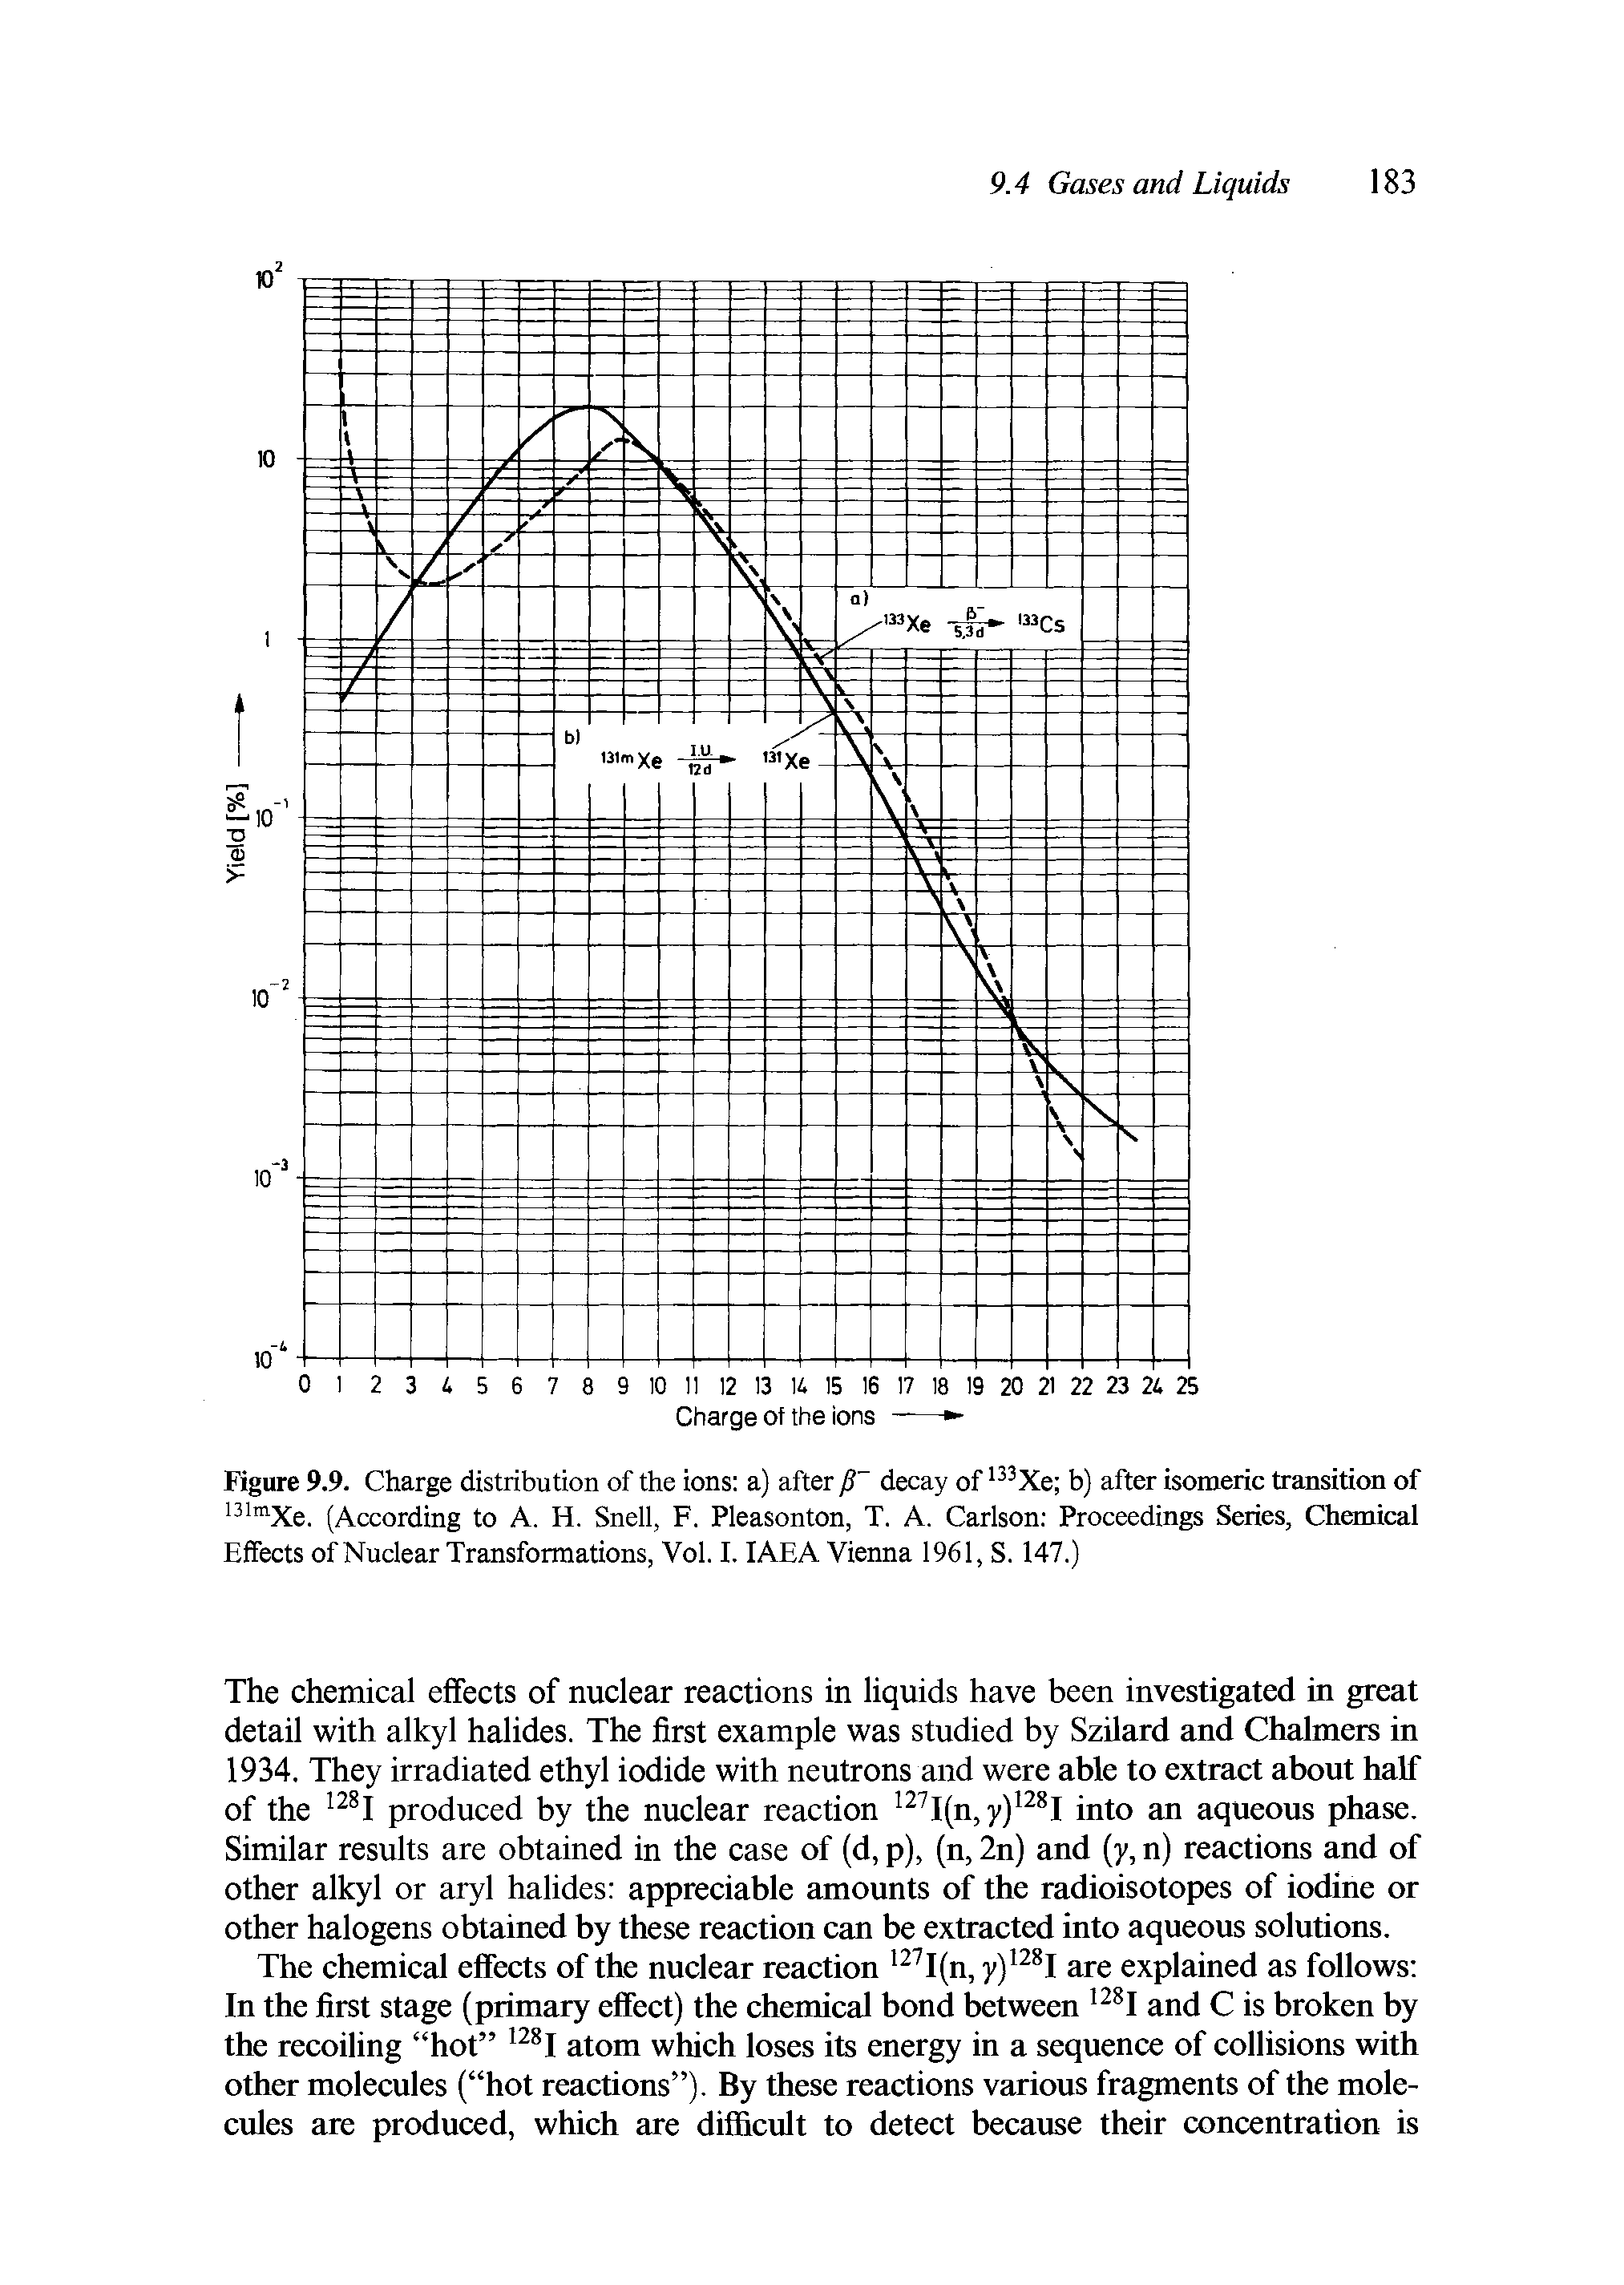 Figure 9.9. Charge distribution of the ions a) after decay of Xe b) after isomeric transition of (According to A. H. Snell, F. Pleasonton, T. A. Carlson Proceedings Series, Chemical Effects of Nuclear Transformations, Vol. I. IAEA Vienna 1961, S. 147.)...